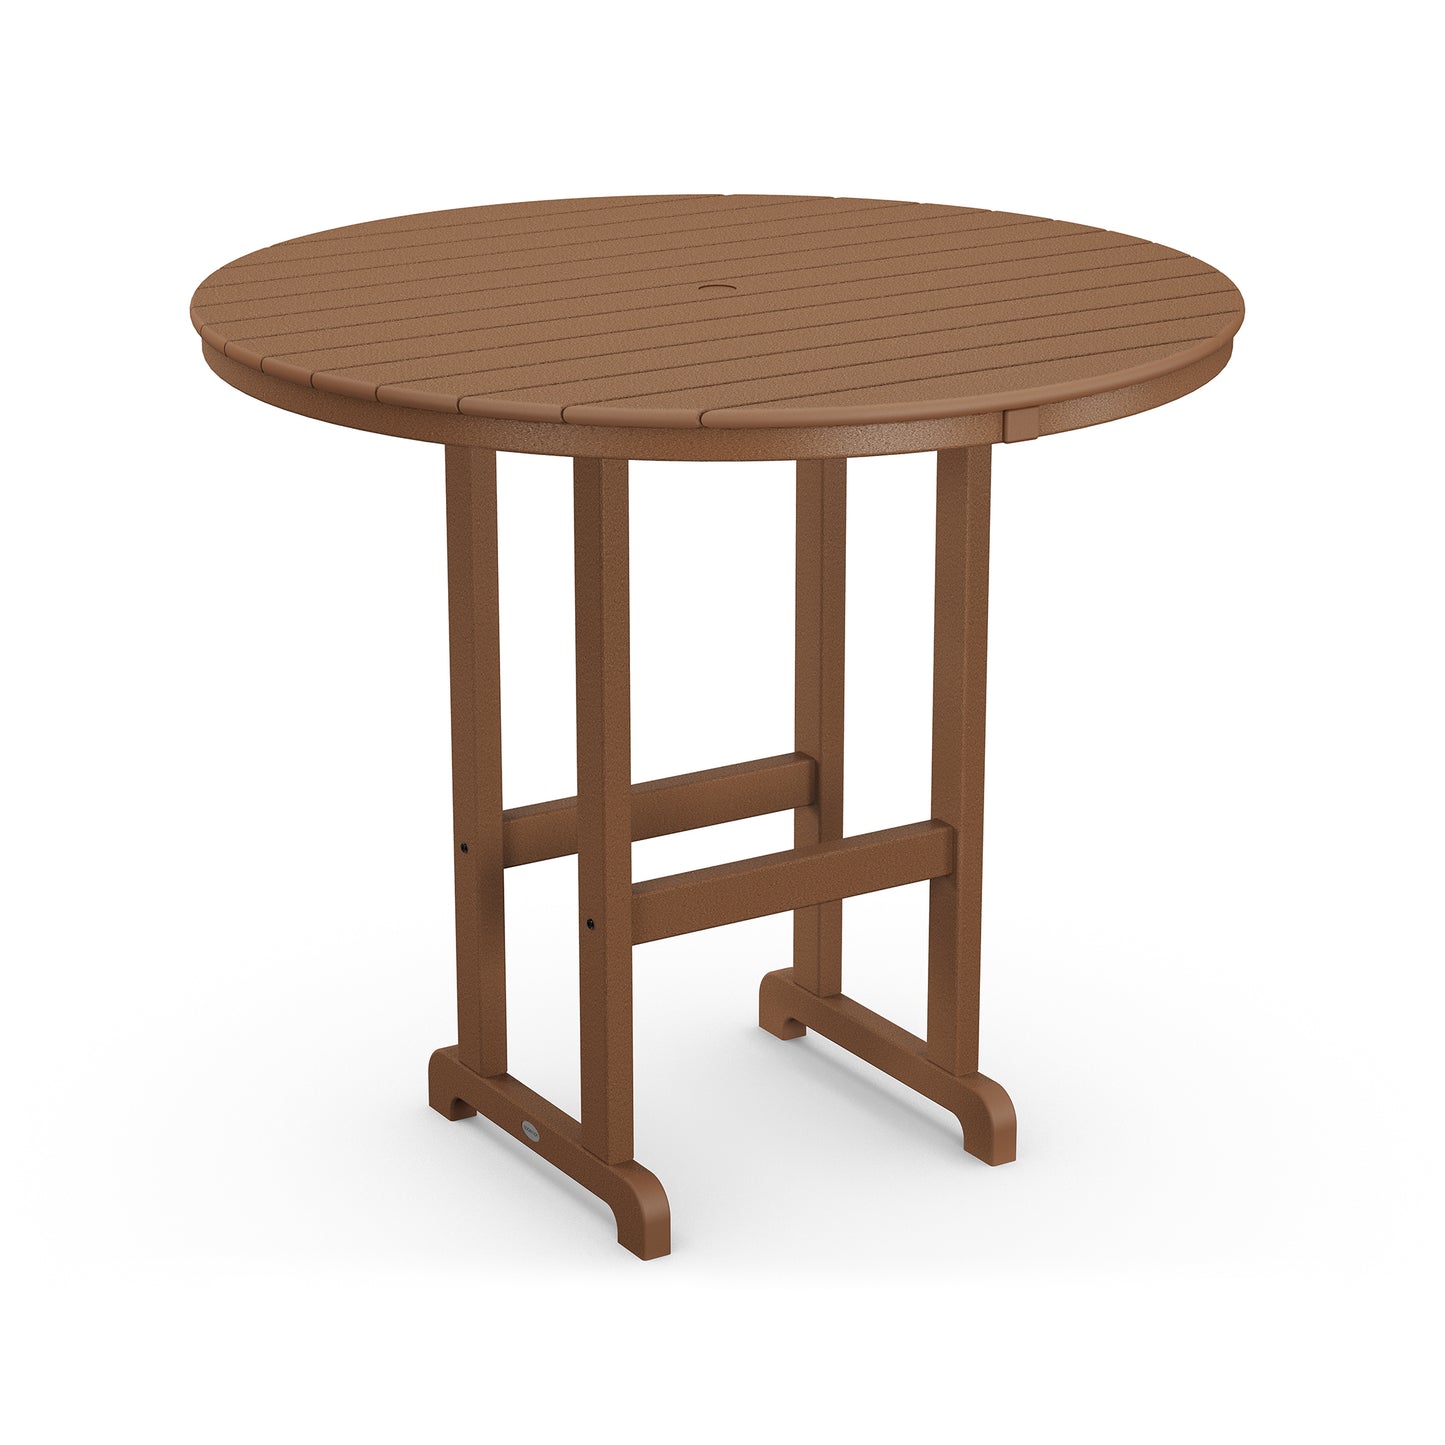 Round brown POLYWOOD® Outdoor 48" Round Bar Table with a slatted top and sturdy legs designed for stability, isolated on a white background.